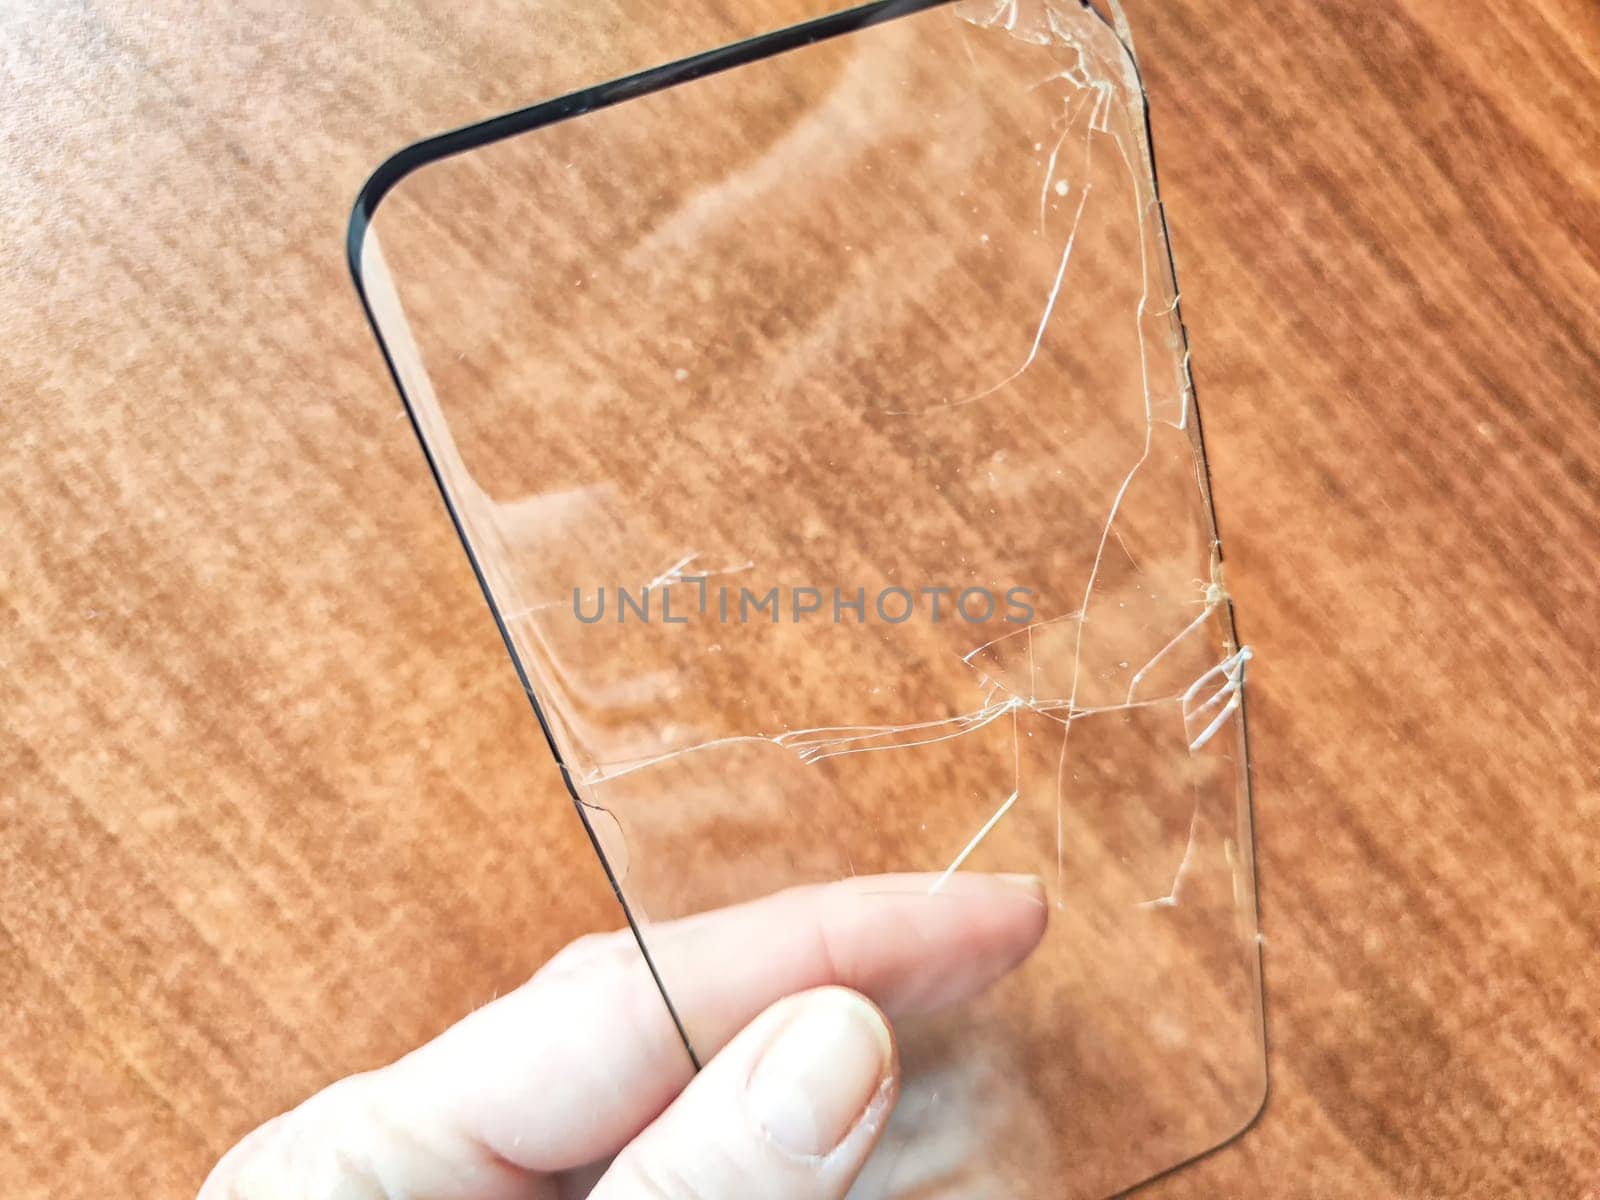 Removing Protective Film From a Cracked Screen. Peeling off a cracked screen protector from a phone by keleny